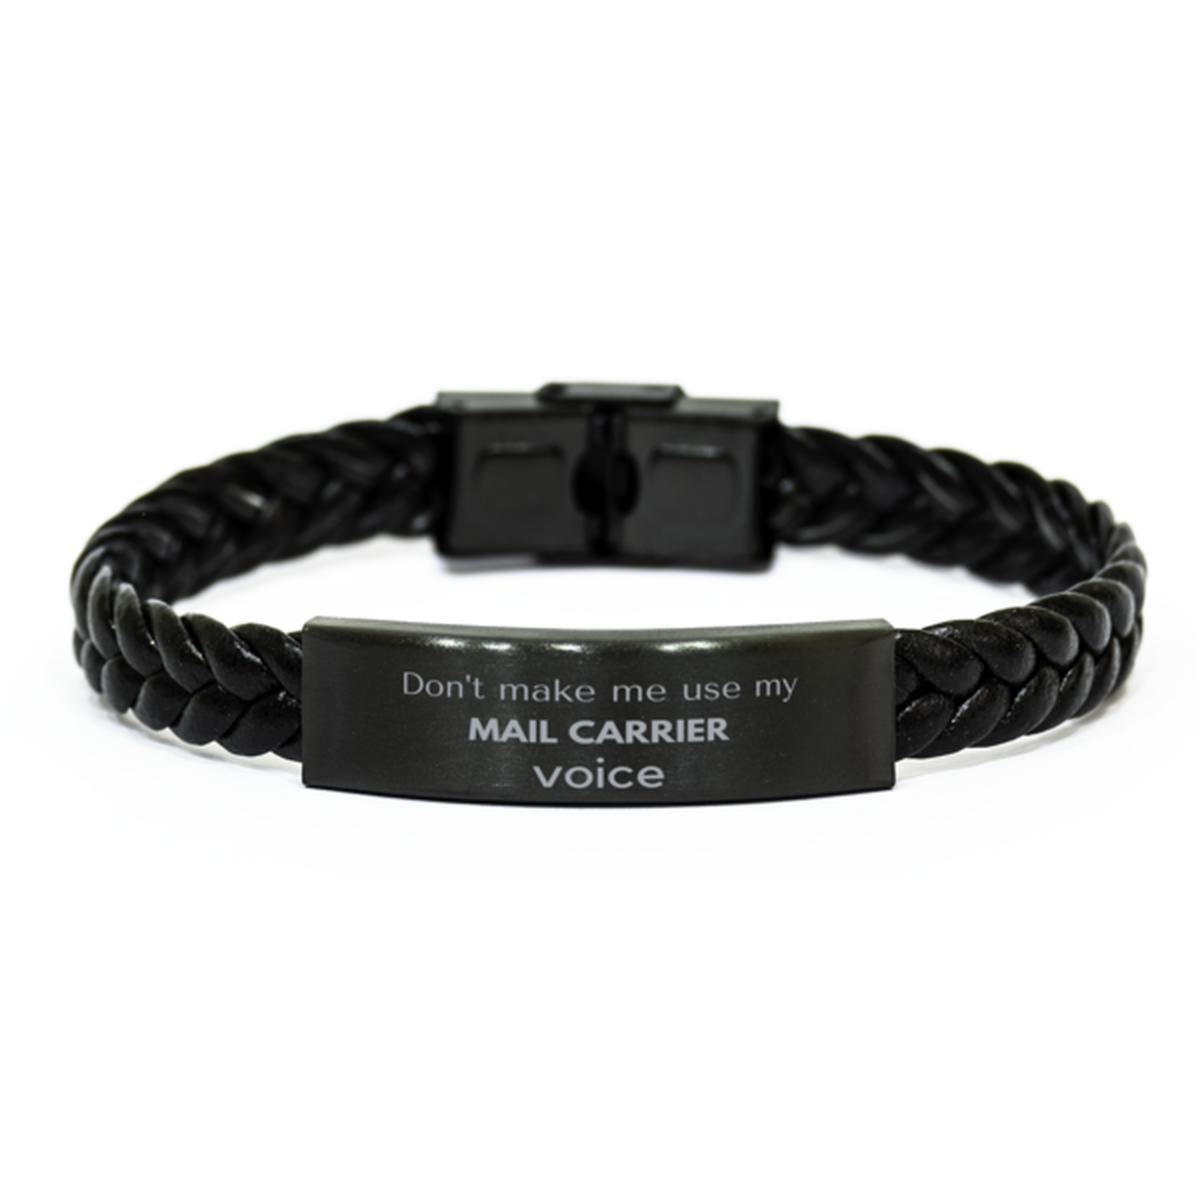 Don't make me use my Mail Carrier voice, Sarcasm Mail Carrier Gifts, Christmas Mail Carrier Braided Leather Bracelet Birthday Unique Gifts For Mail Carrier Coworkers, Men, Women, Colleague, Friends